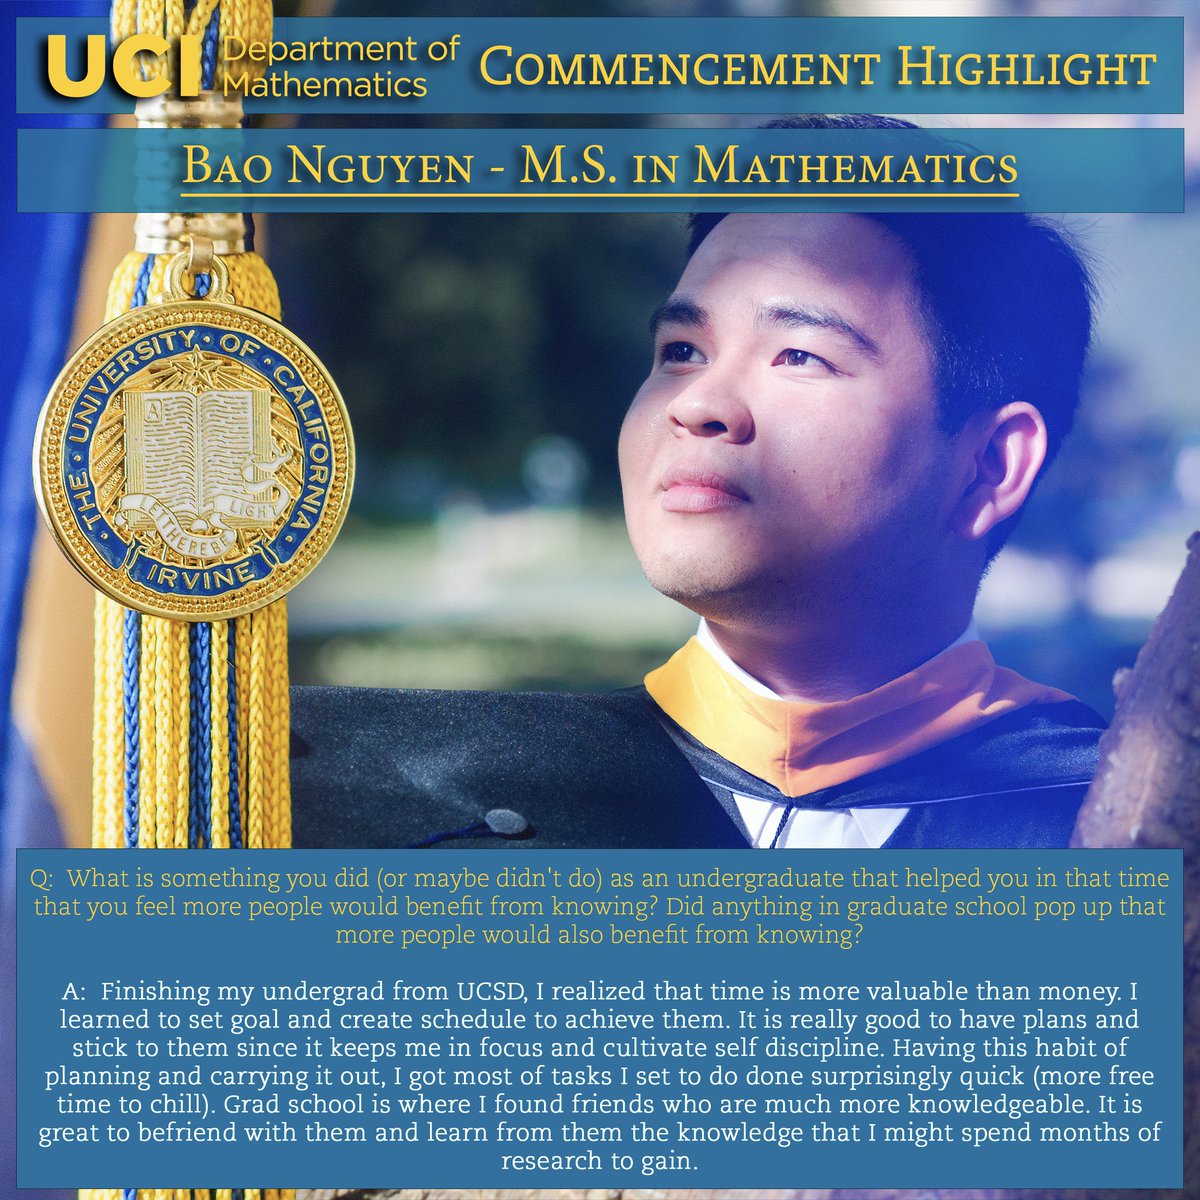 In anticipation of Commencement, we feature Bao Nguyen, a graduating MS student. Learn more about his interests and tune into his words of advice for future students of mathematics. #ucimath #ucicommencement #commencement #graduation #ucigraduation